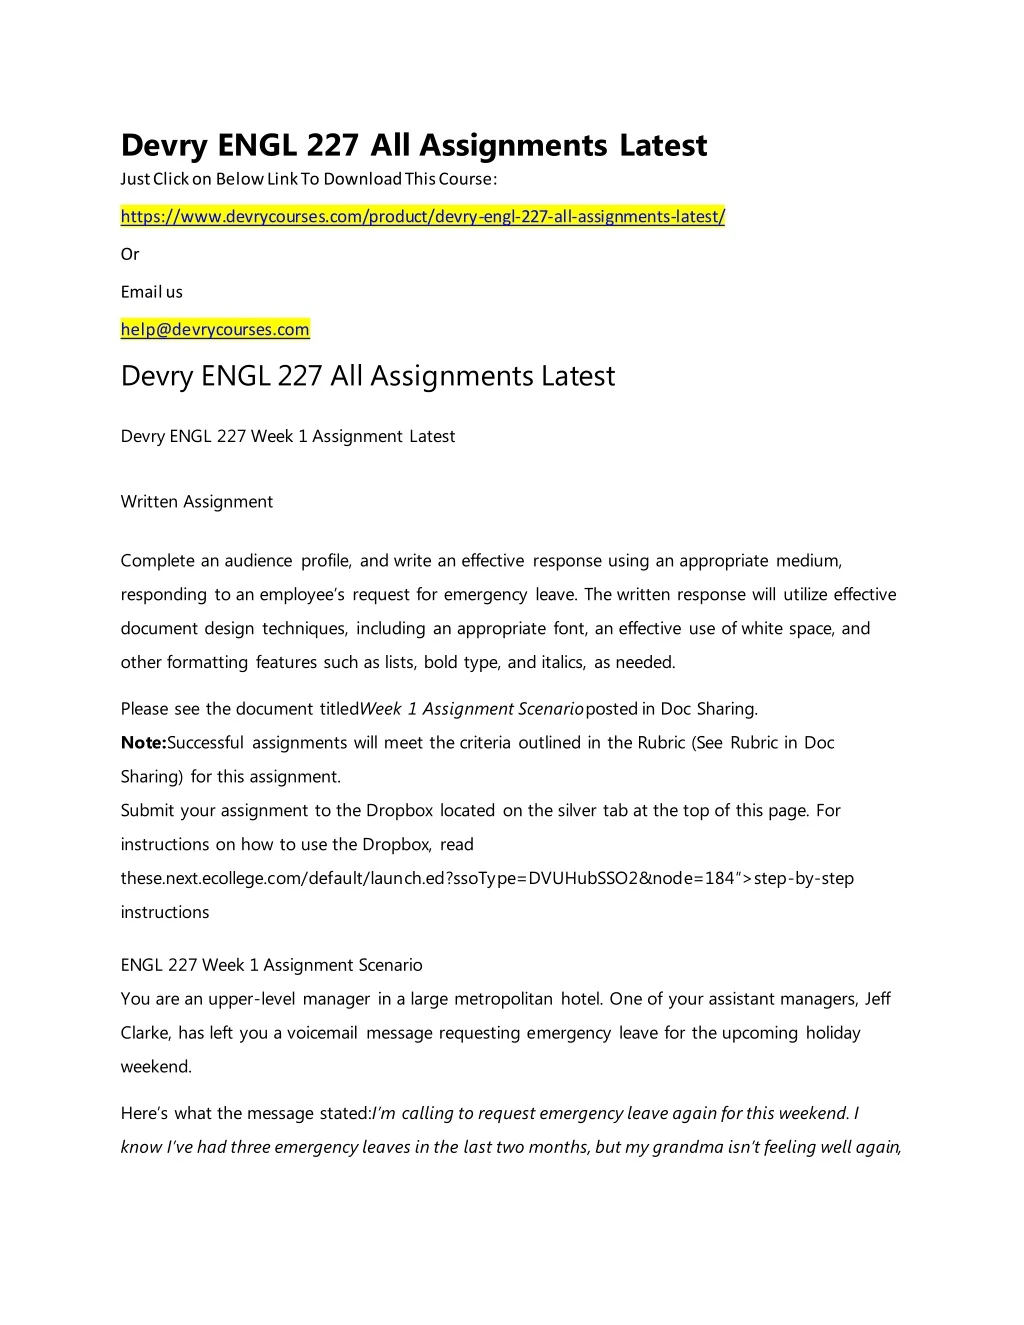 devry engl 227 all assignments latest just click